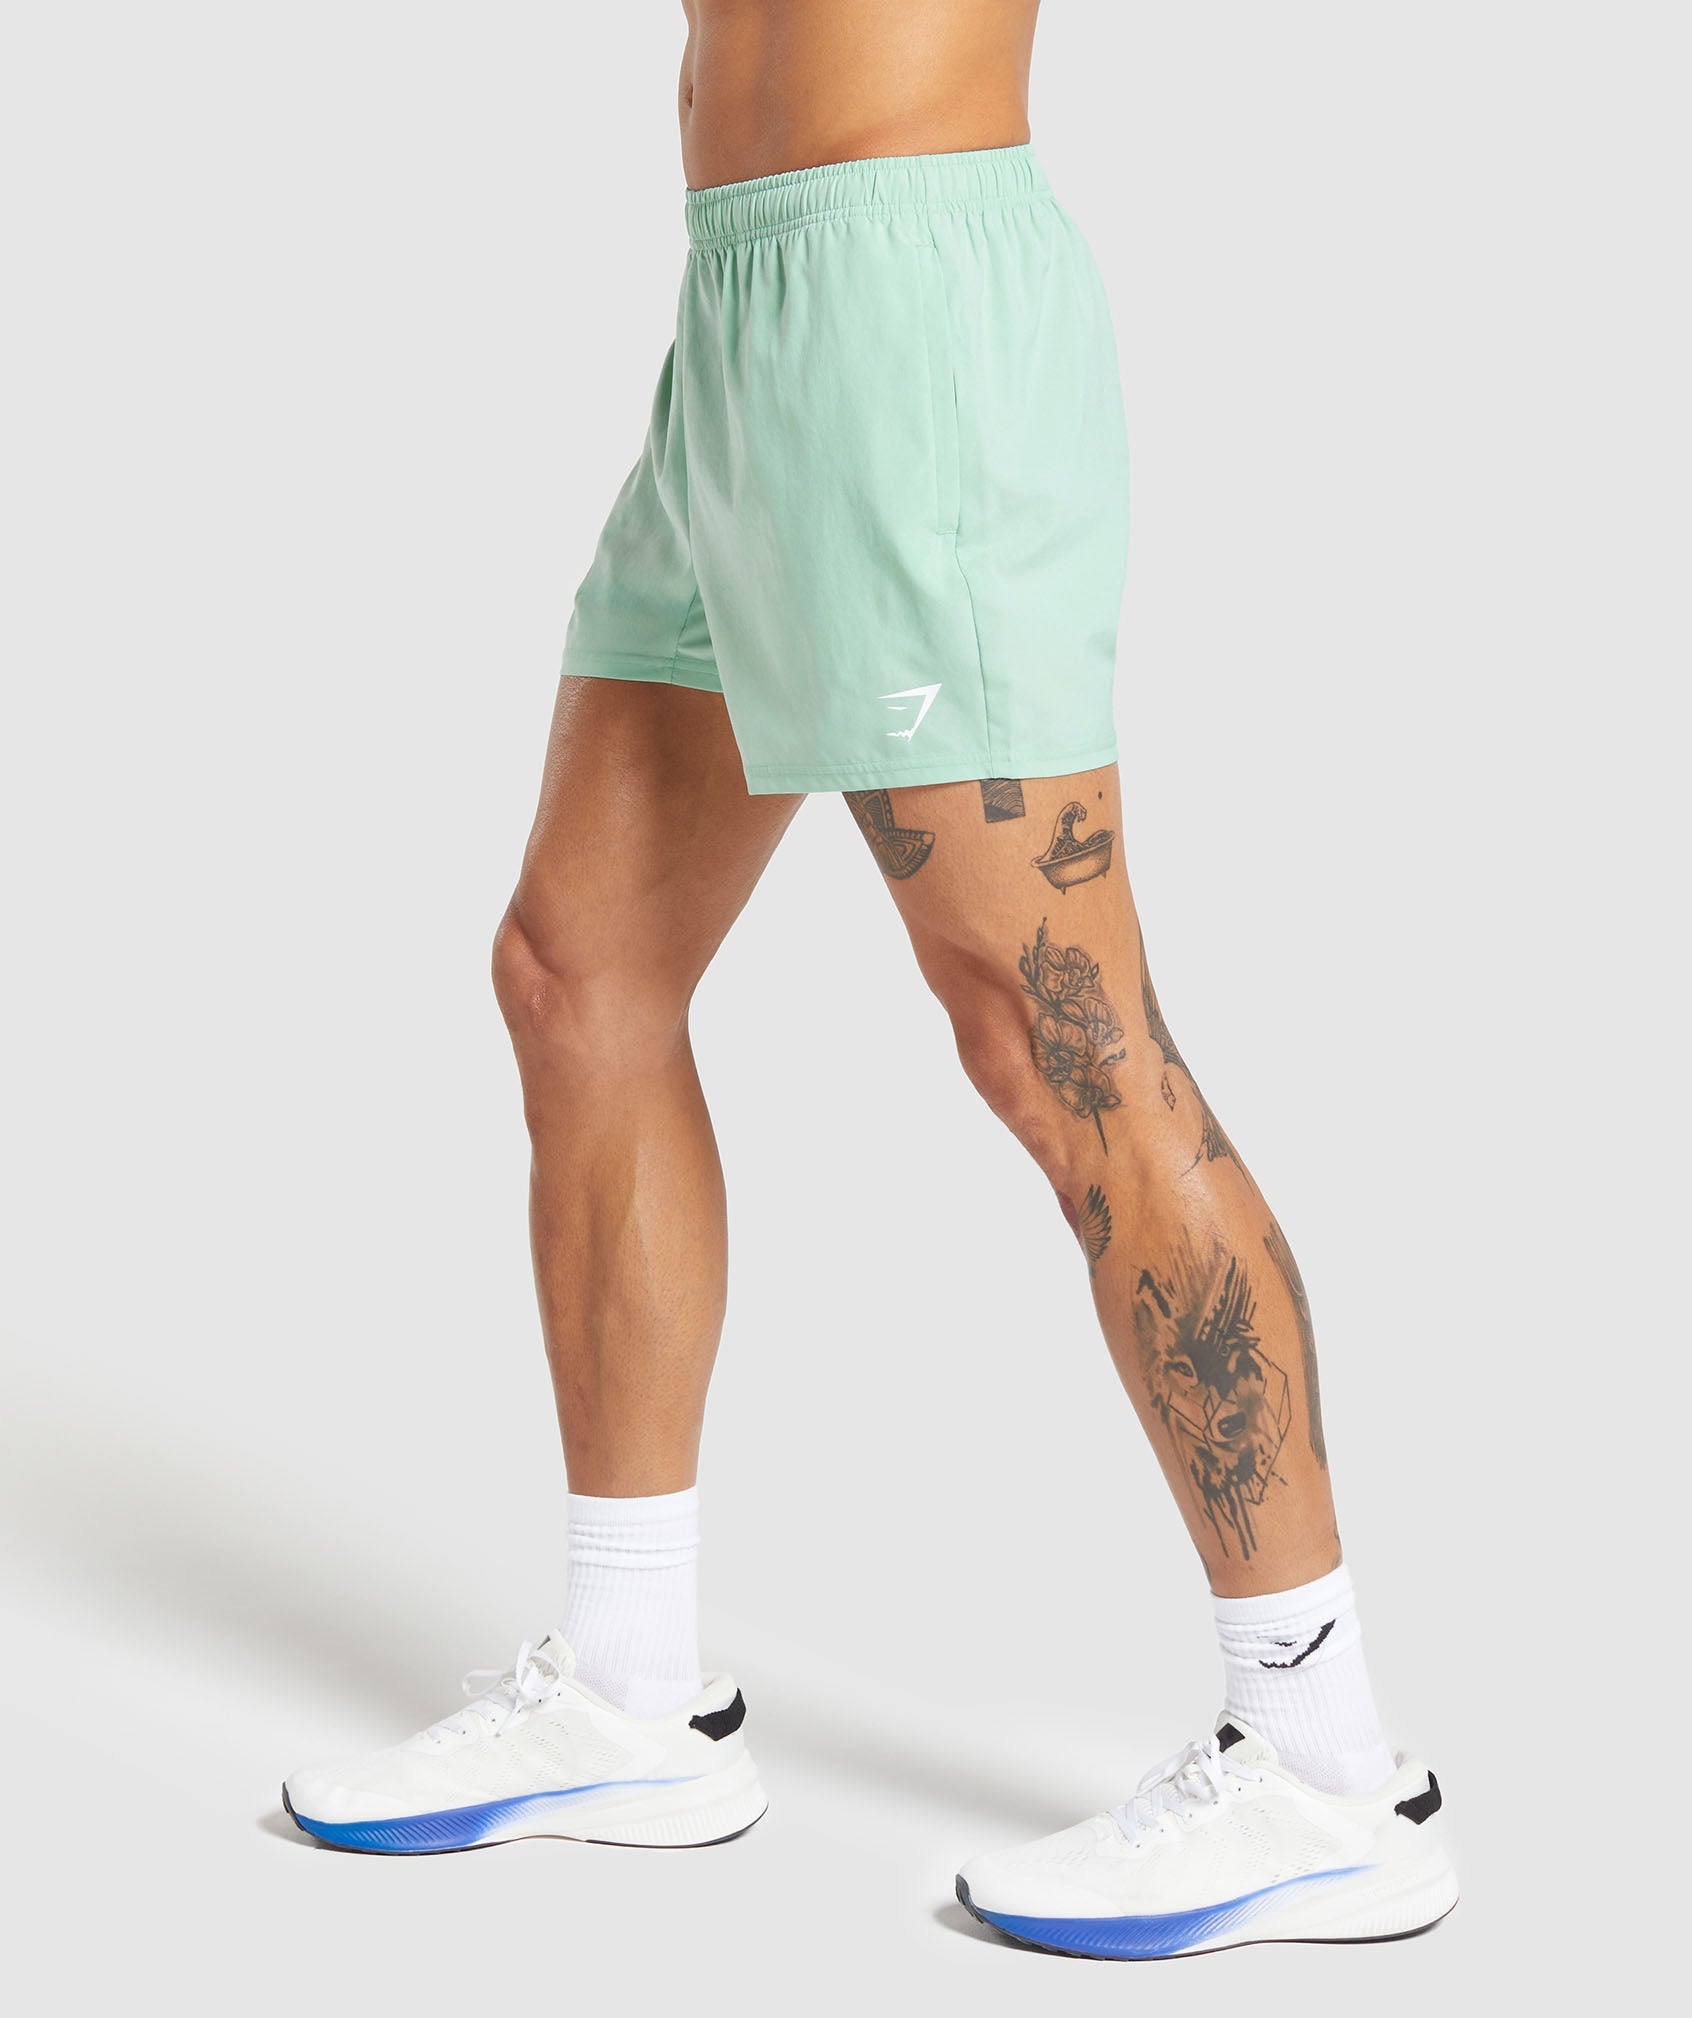 Arrival 5" Shorts in Lido Green - view 3